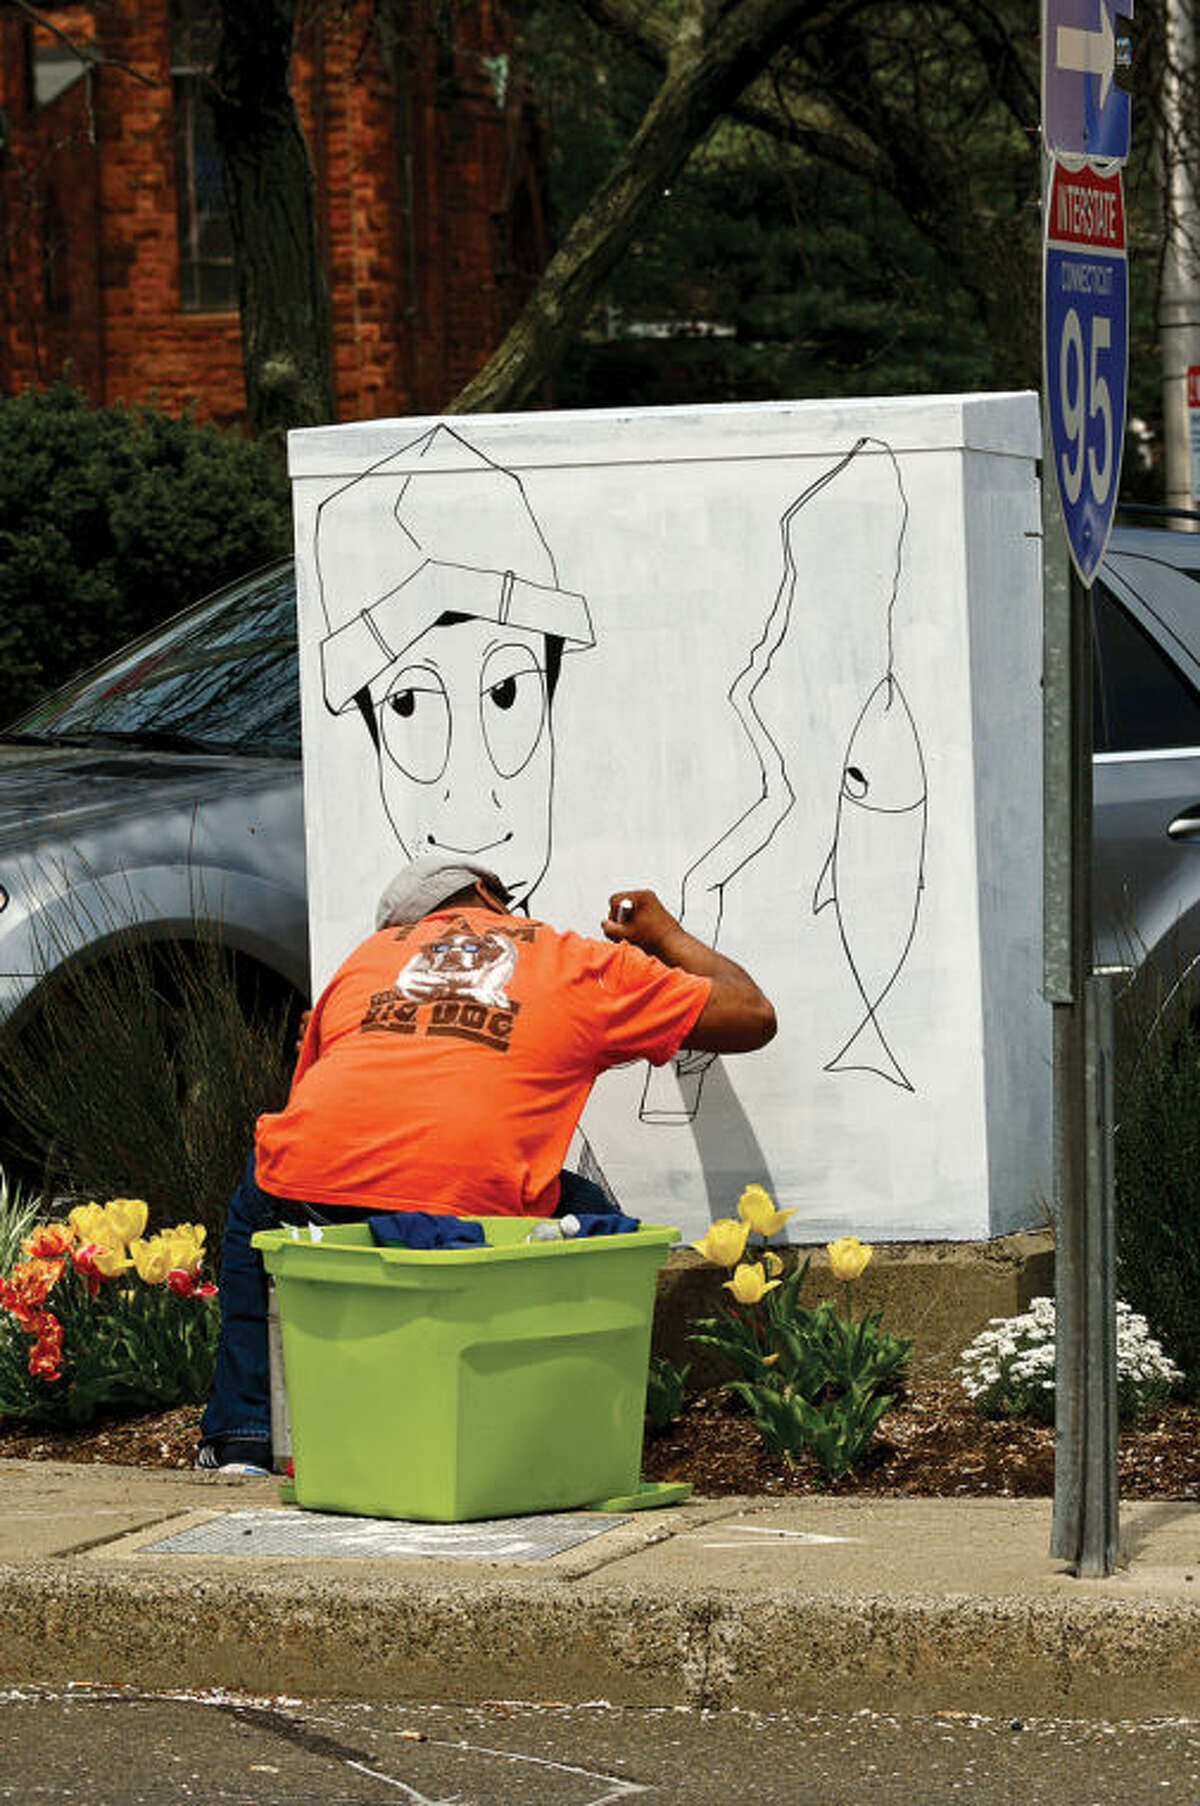 Hour photo / Erik Trautmann Norwalk artist Dooly-O paints a elctrical box along Martin Luther King BLVD as part of the Urban Art program which transforms traffic boxes along city streets in South Norwalk.